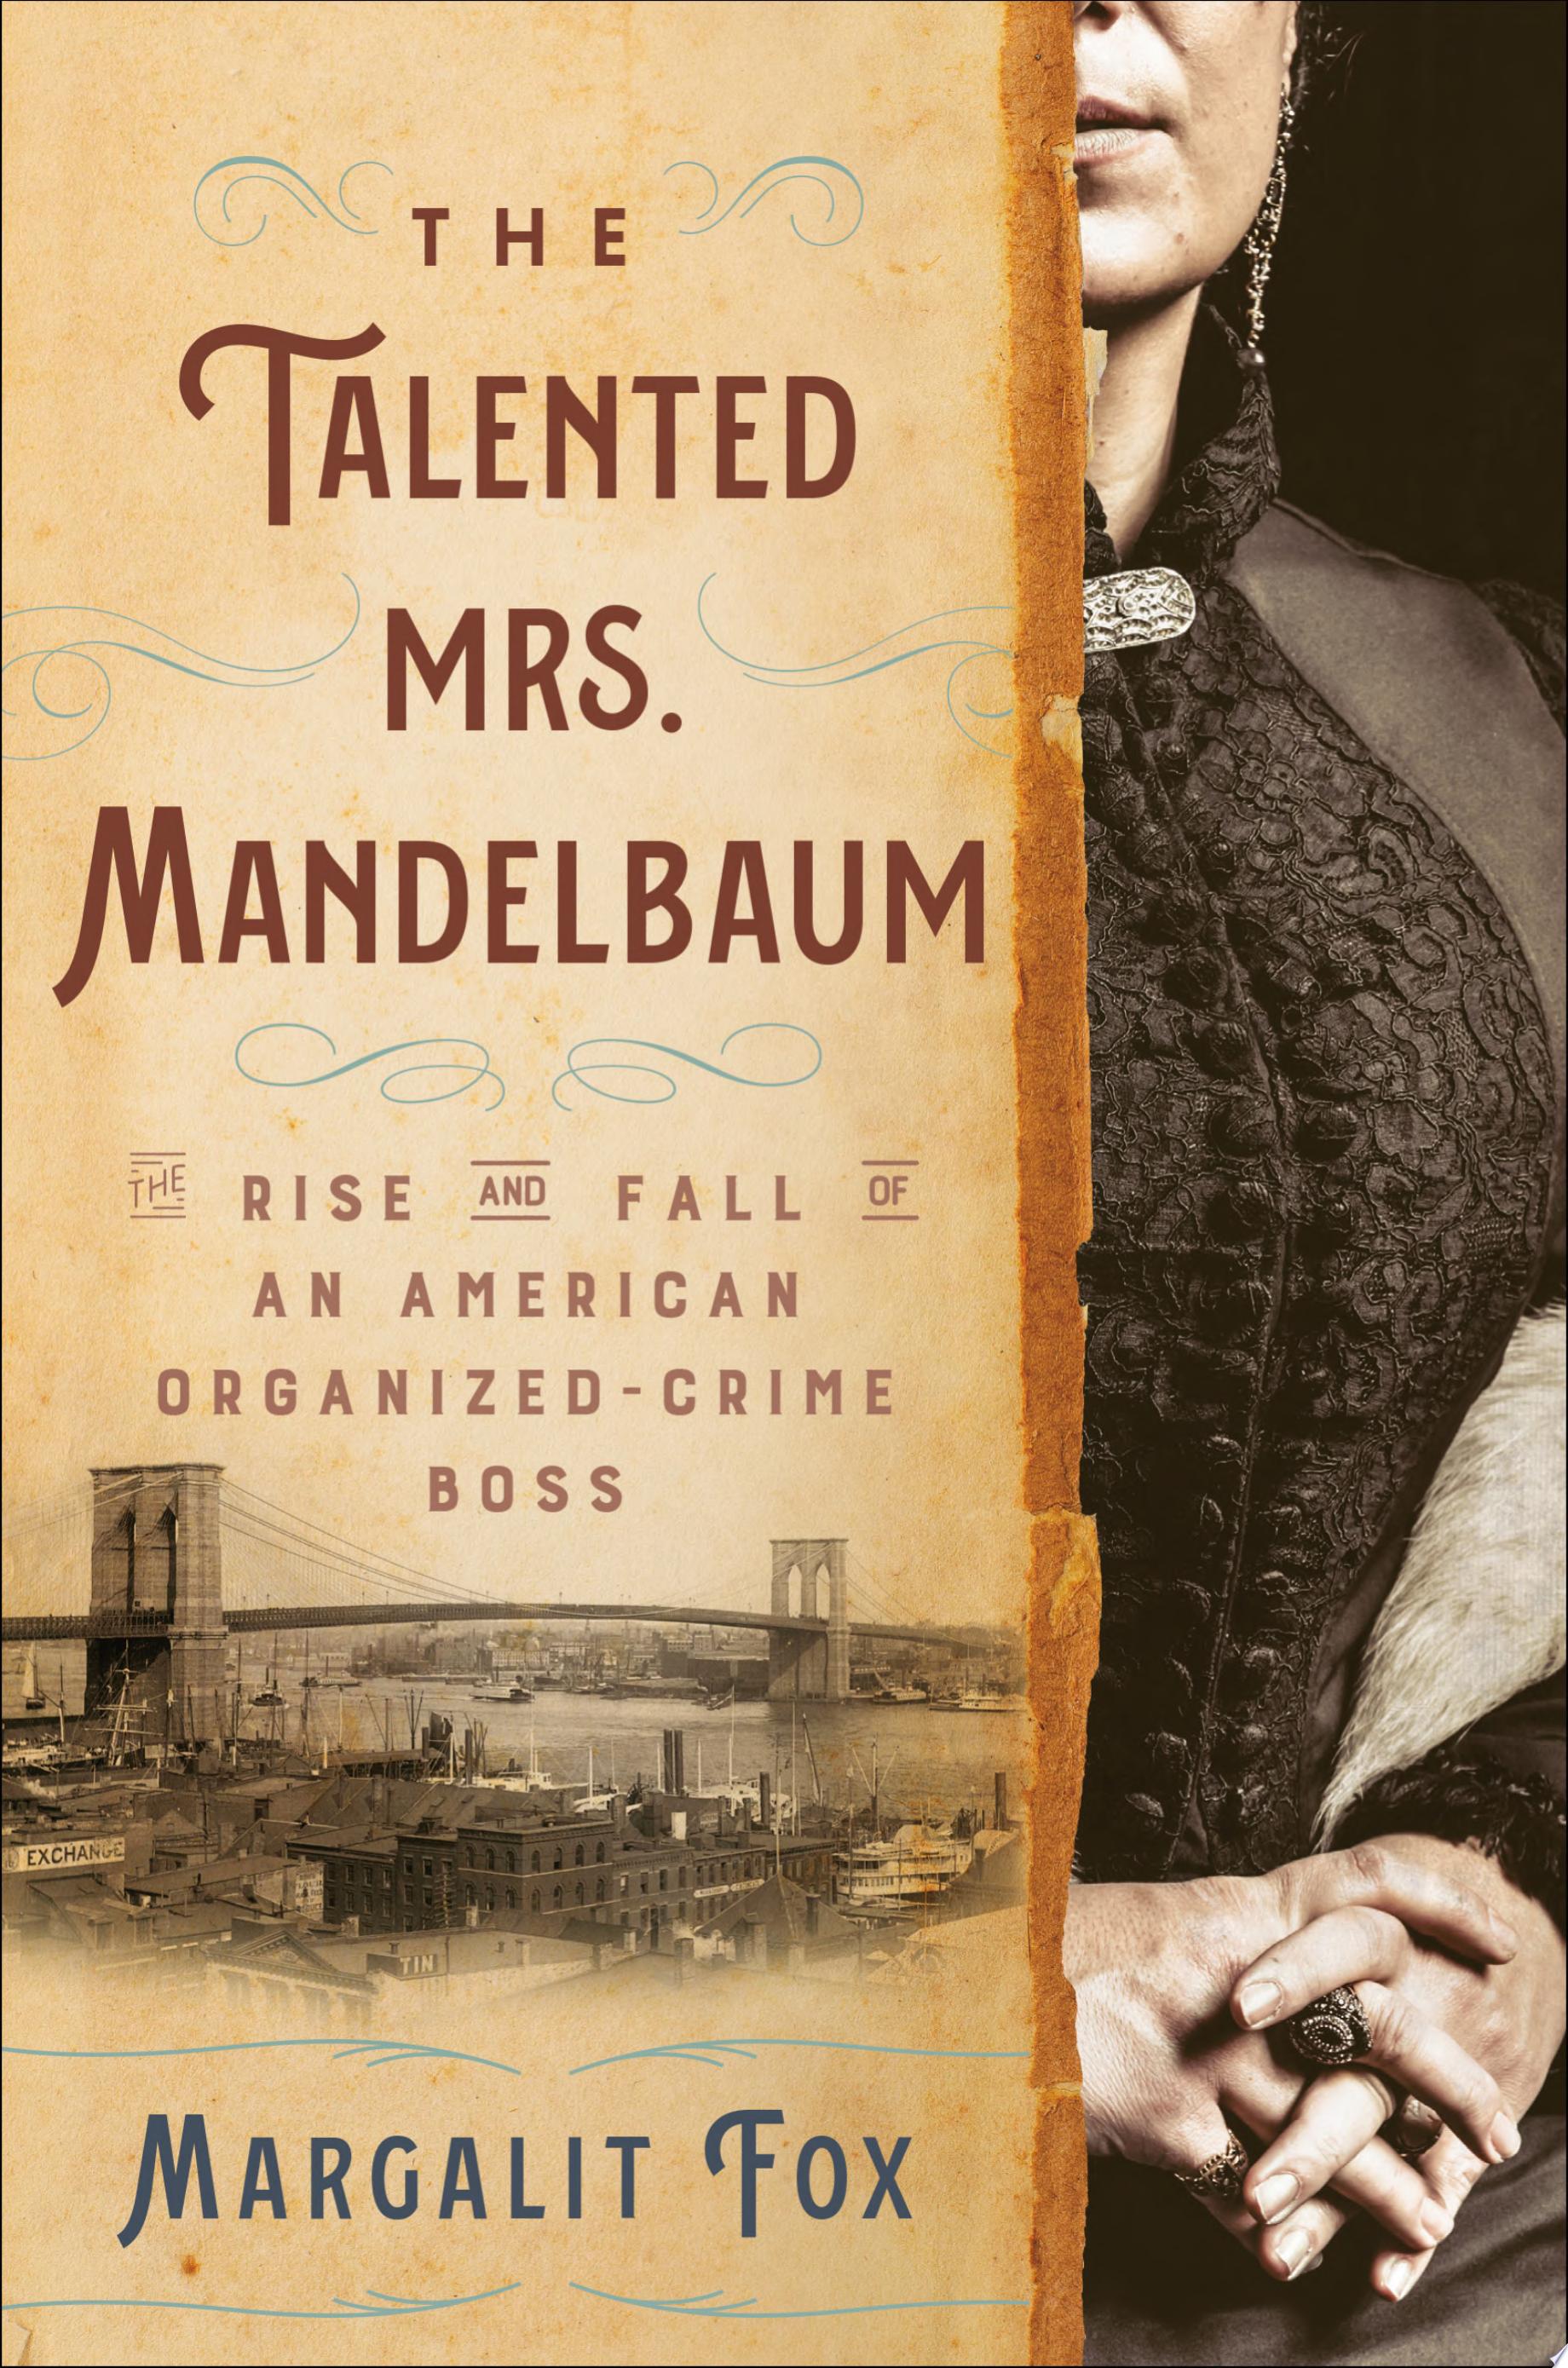 Image for "The Talented Mrs. Mandelbaum"